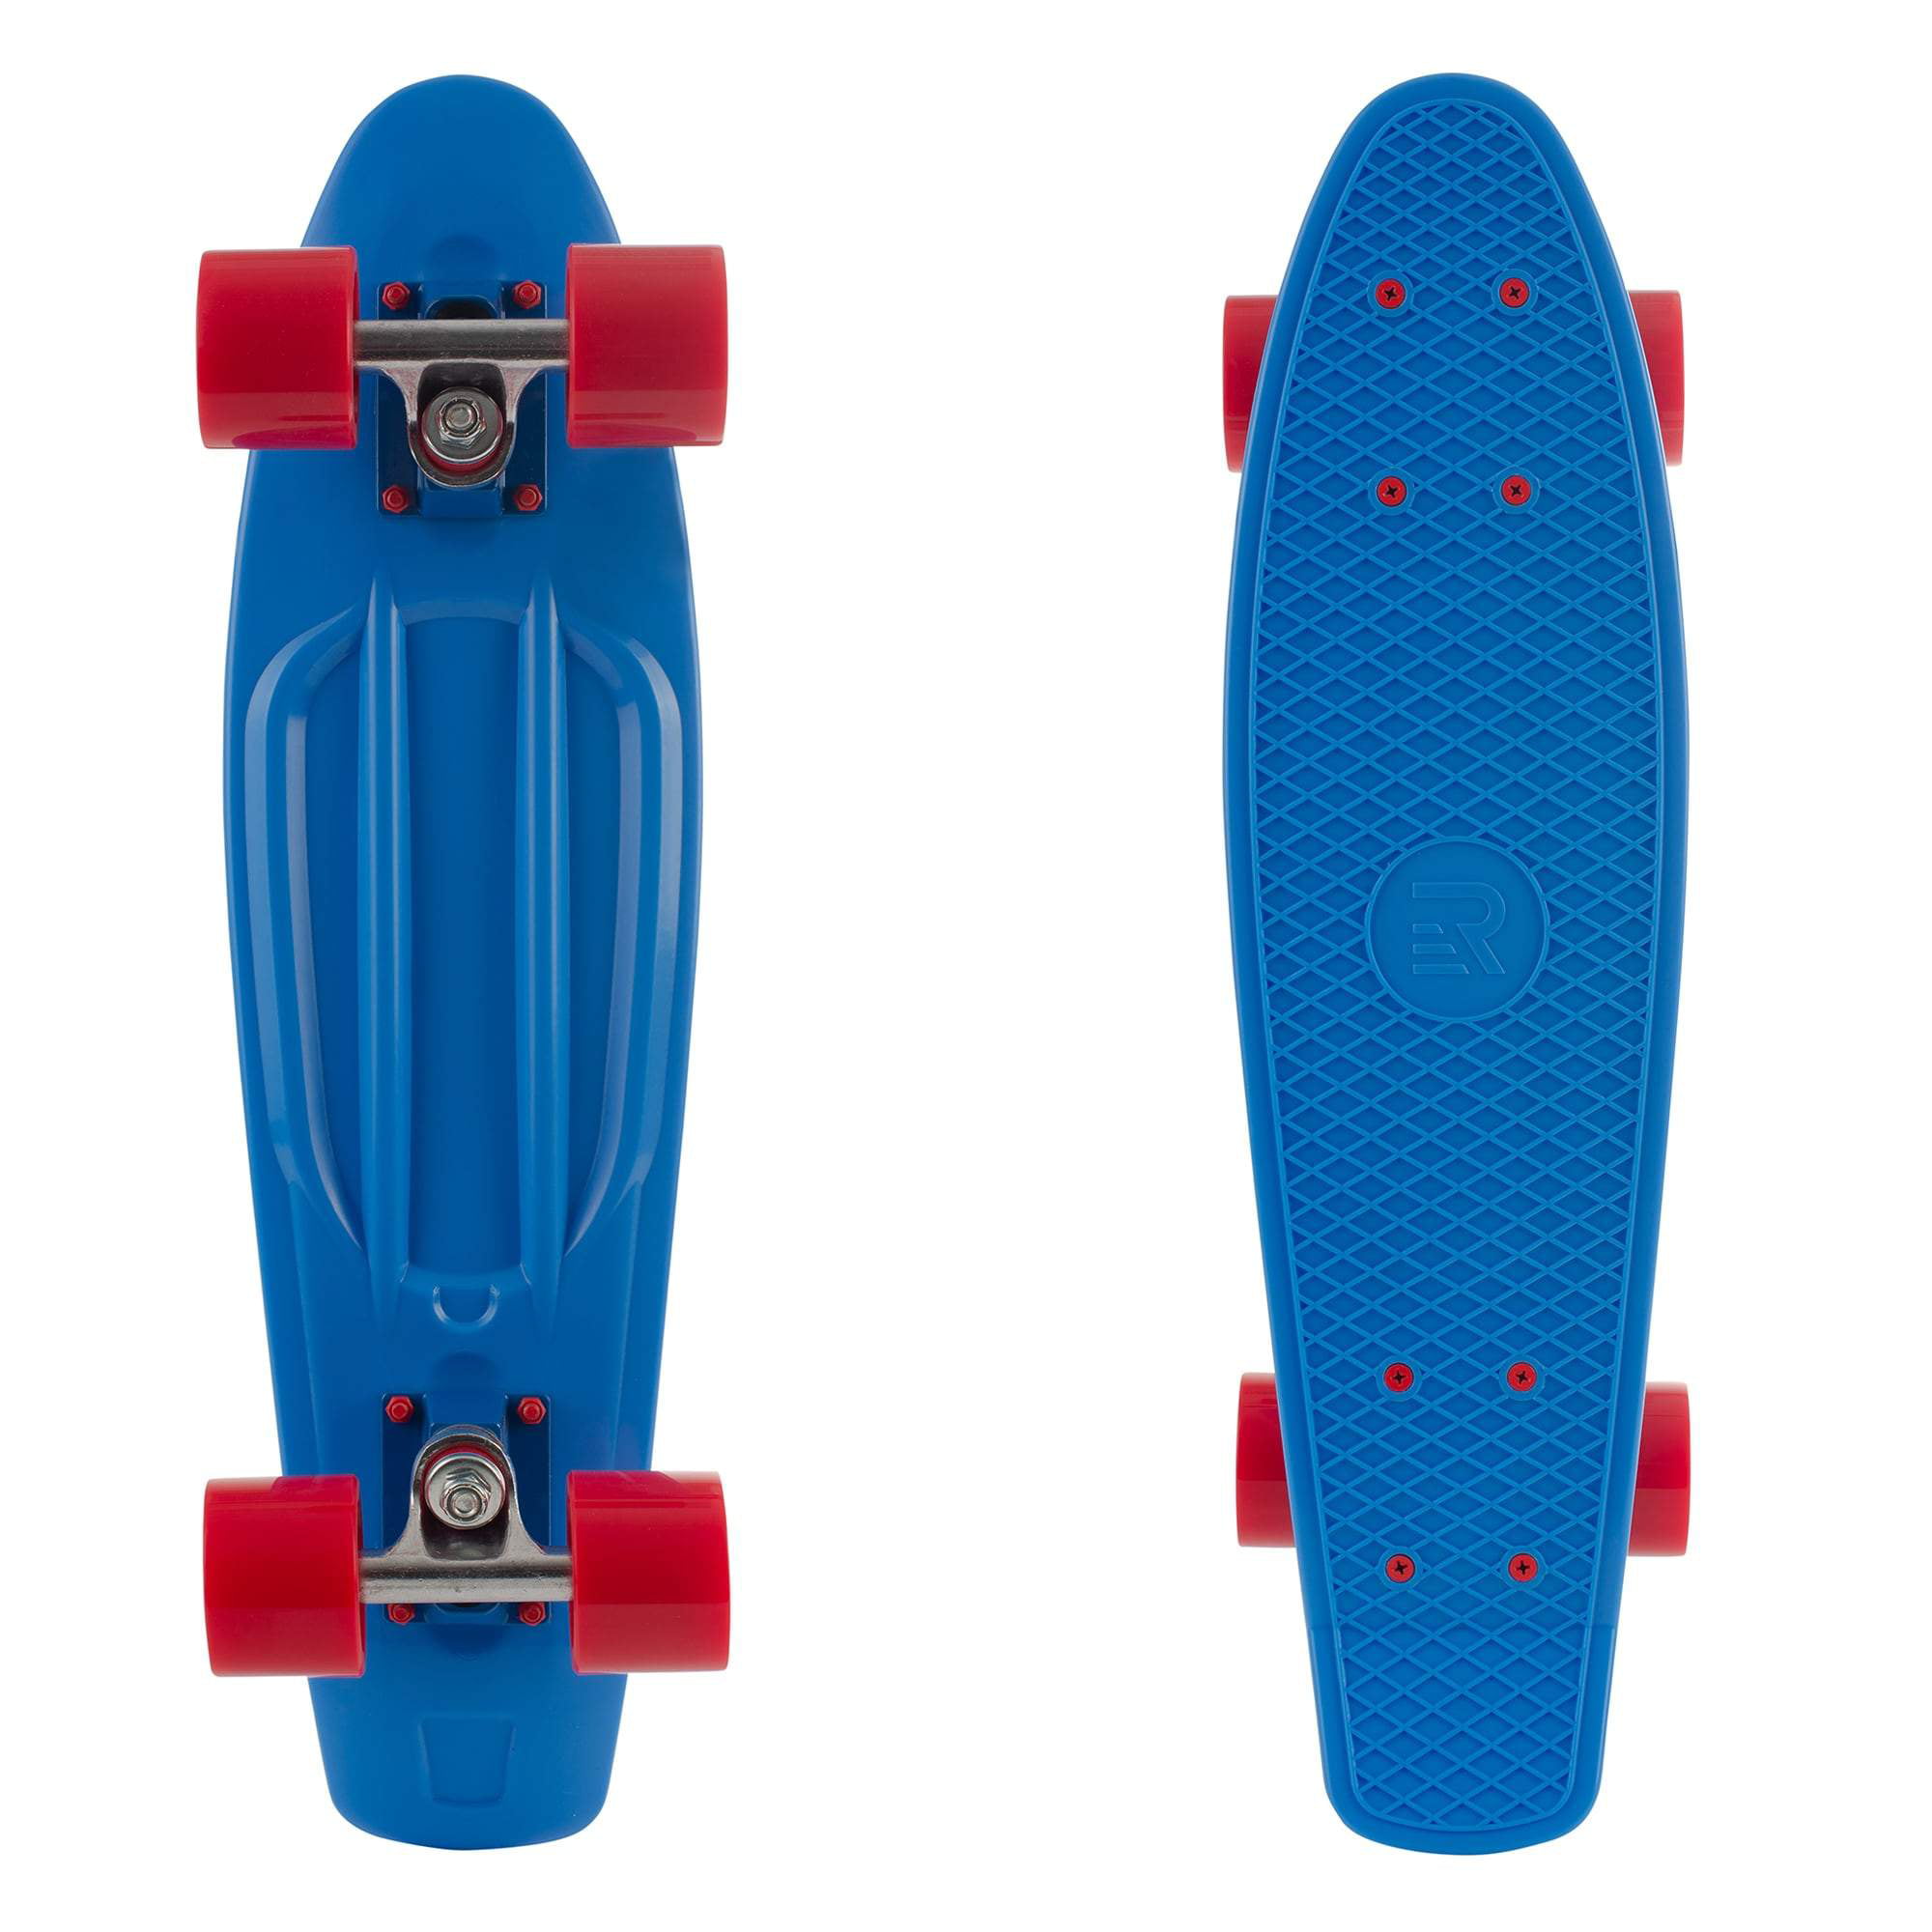 with MACH1® ABEC-11 High Speed bearings/Wheels 59x45mm 82A FunTomia Mini-Board Skateboard Retro Cruiser 22,5 INCH 57cm with or without LED Wheels